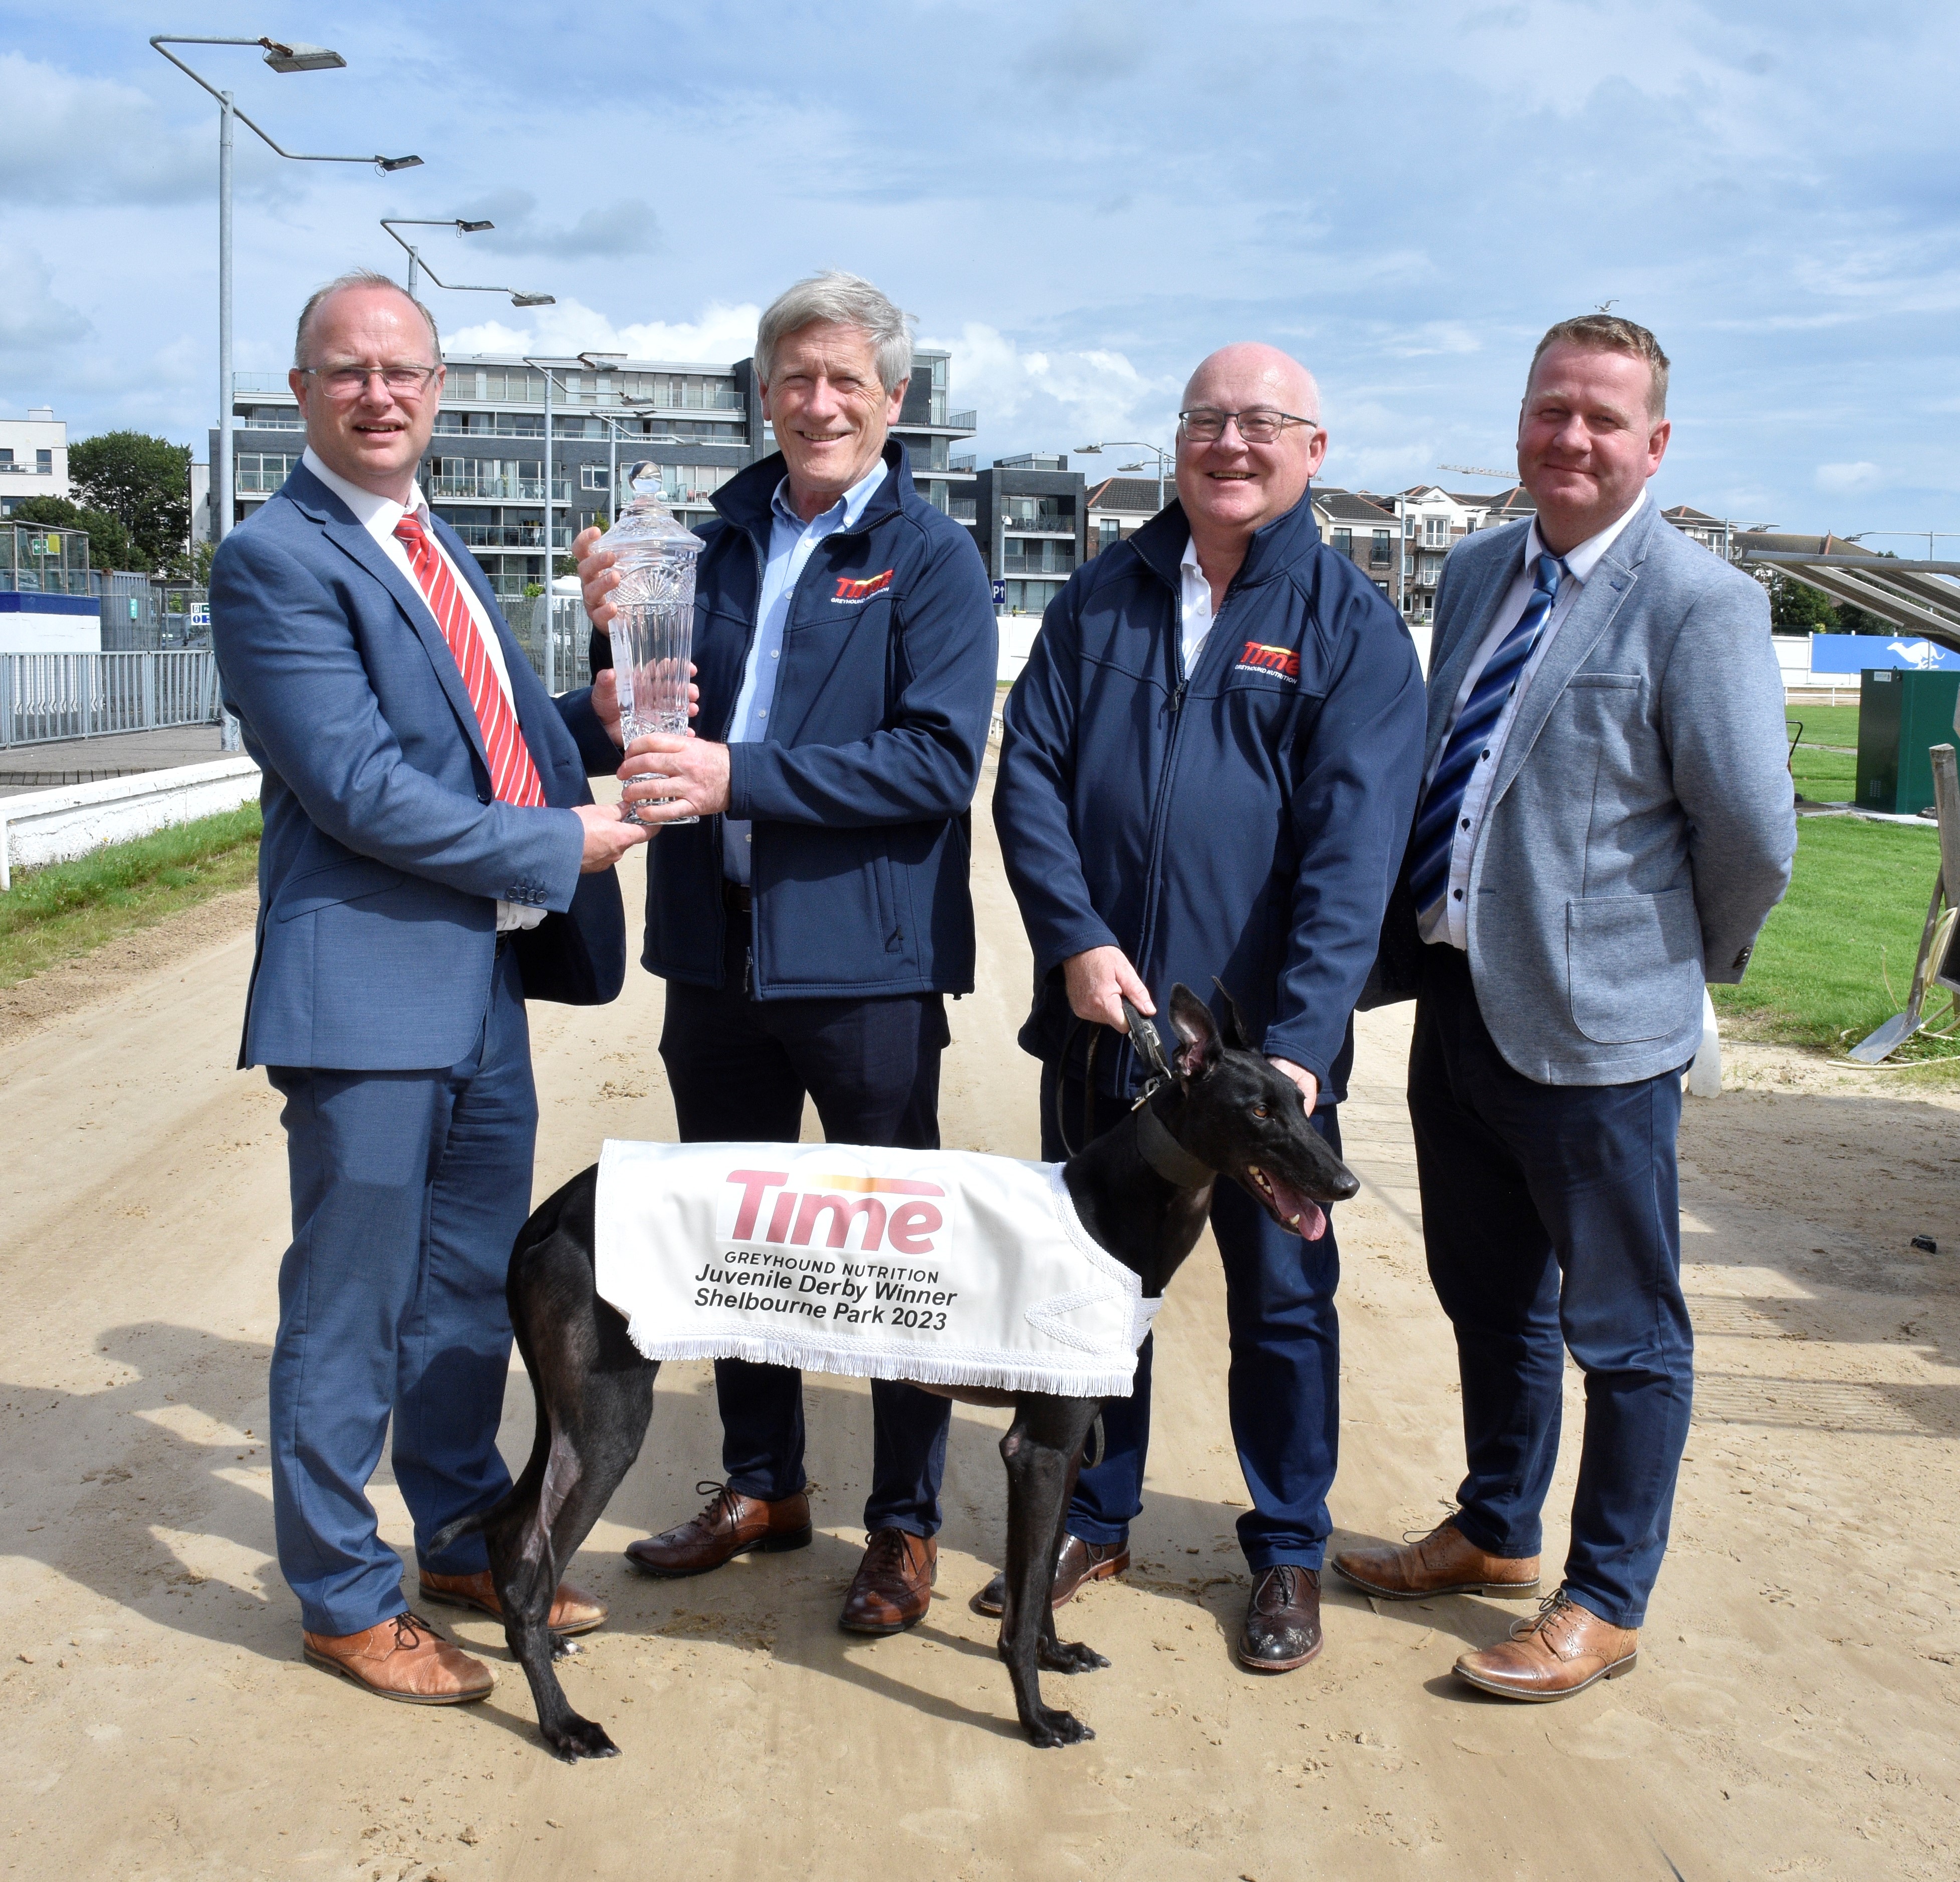 Launching the €41,500 2023 Time Greyhound Nutrition Juvenile Derby at Shelbourne Park Greyhound Stadium  L-R Michael Dempsey, Racing Manager at Shelbourne Park, receives the winner’s trophy from sponsors John Fox and William Rigney of Time Greyhound Nutrition, accompanied by Derek Frehill Director Of Racing at Greyhound Racing Ireland